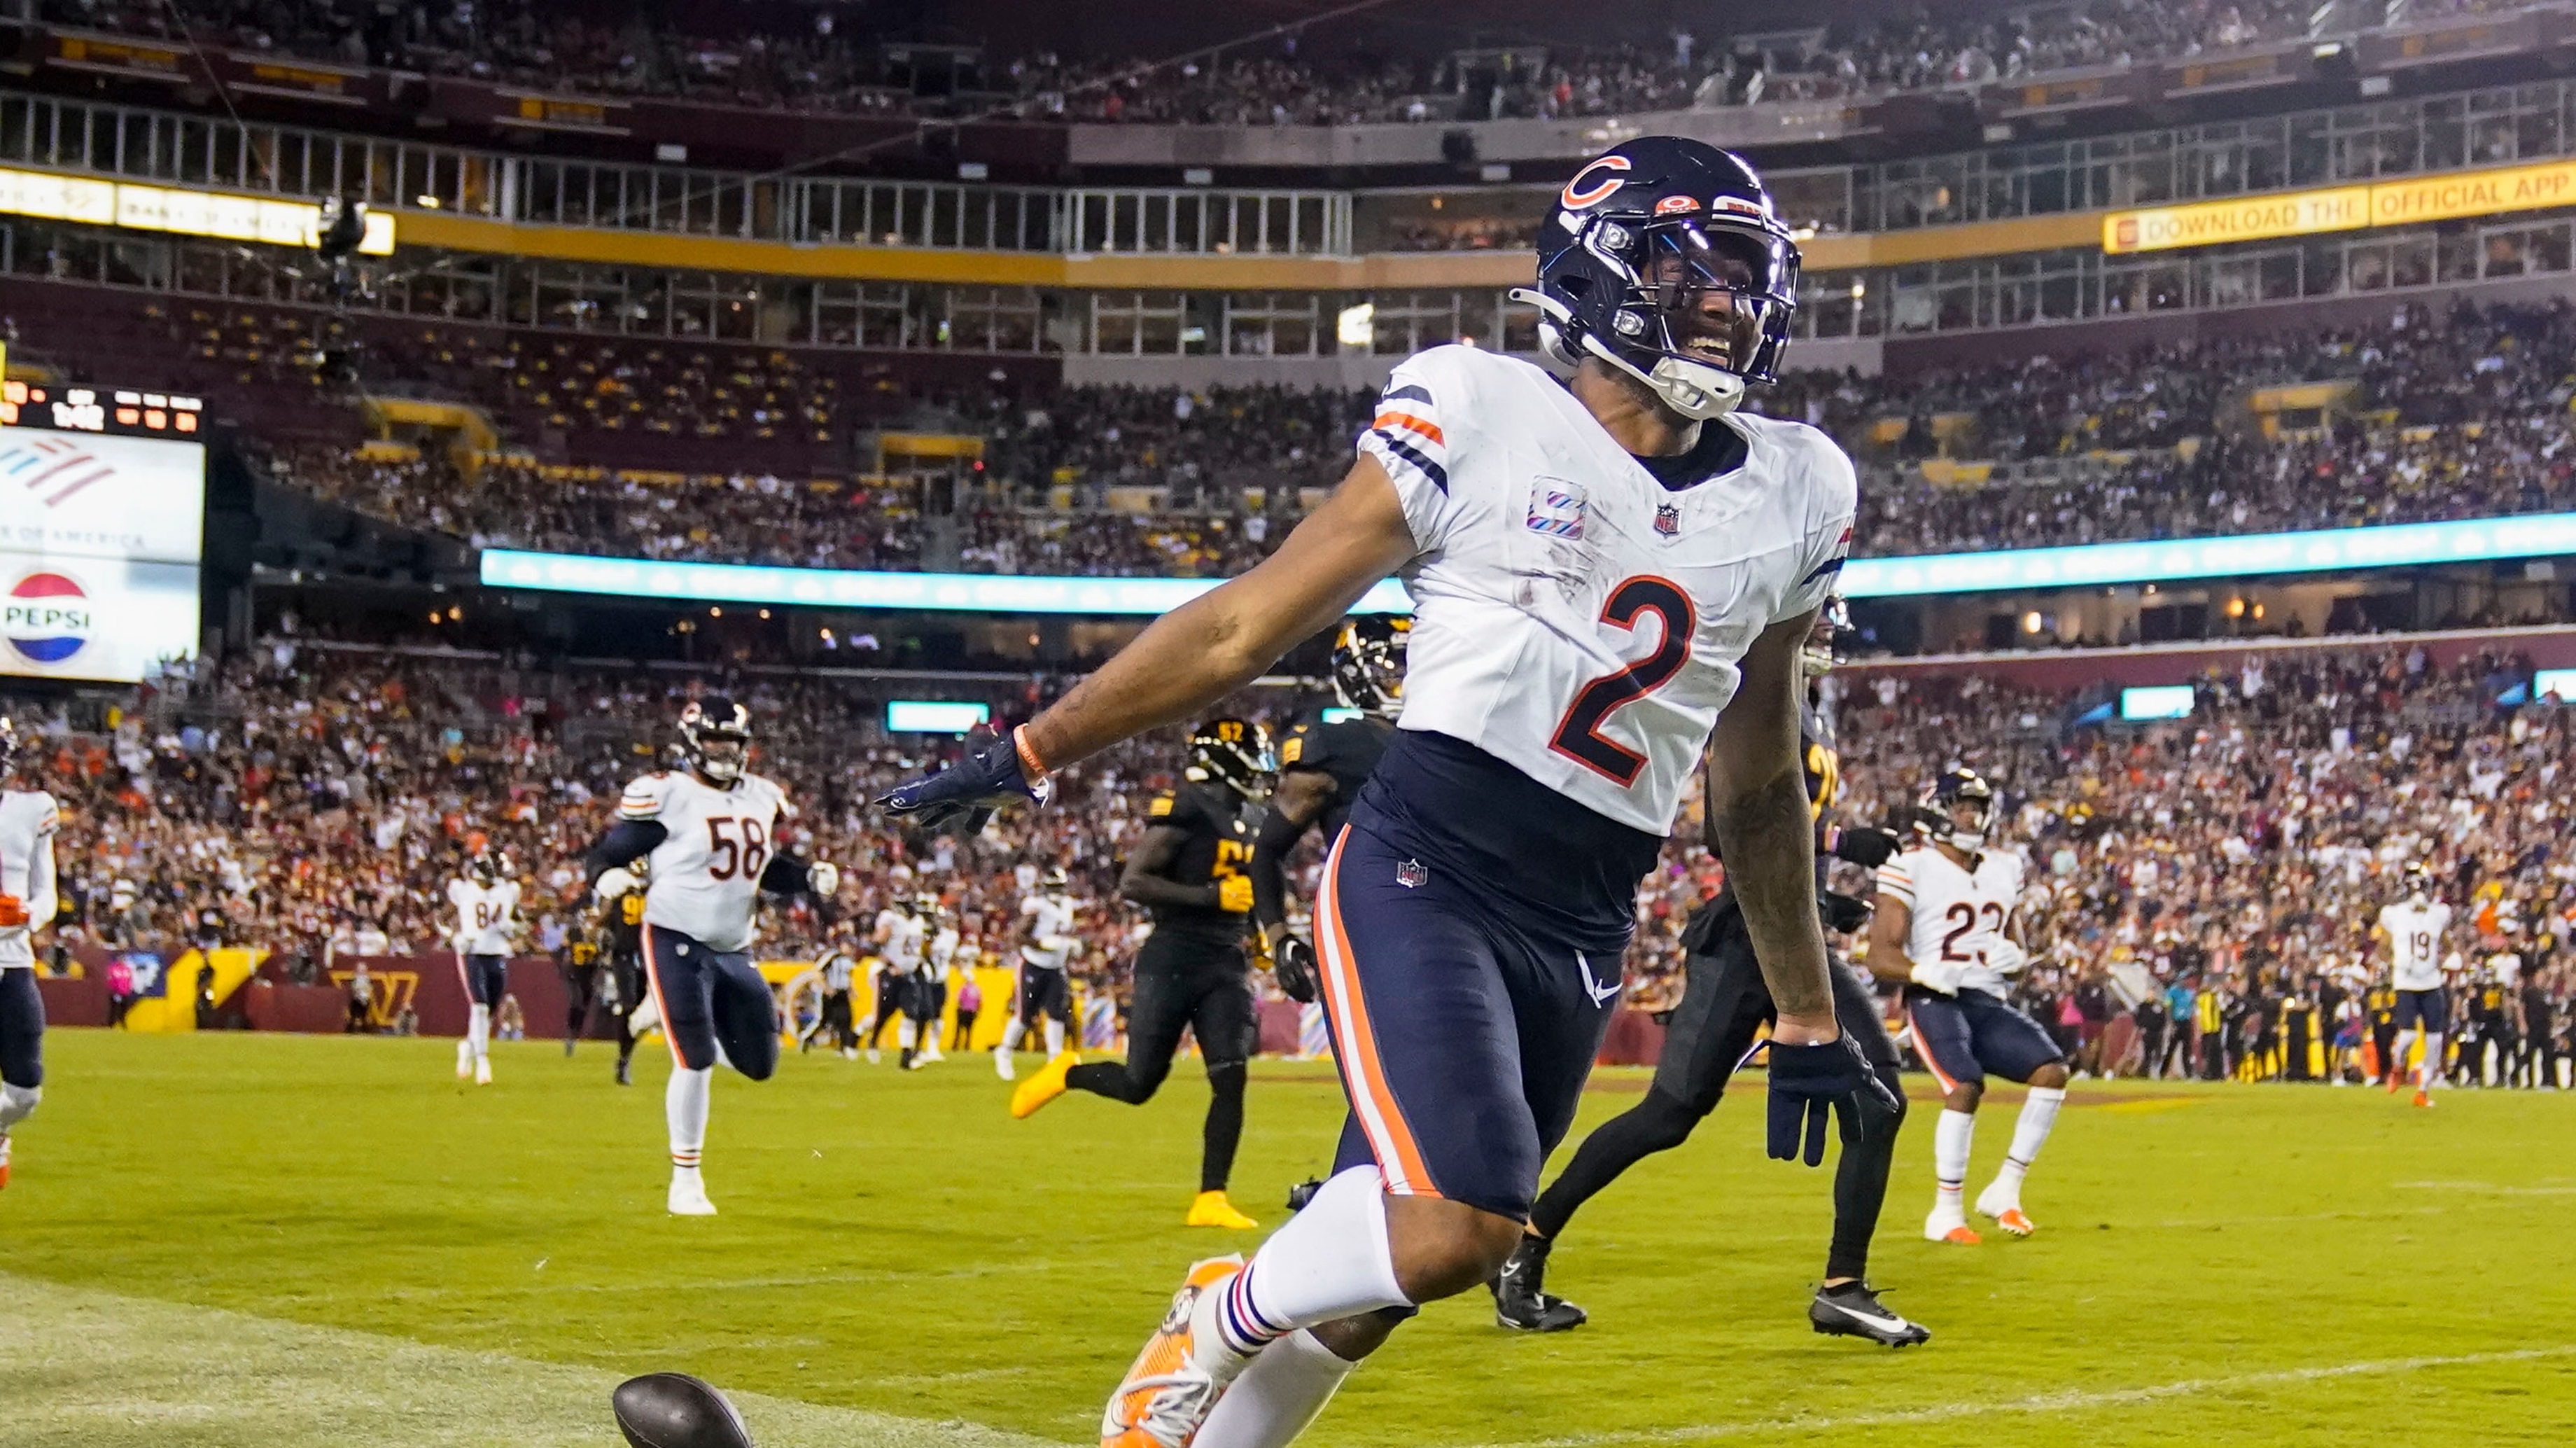 Bears wide receiver DJ Moore caught three touchdowns in Thursday’s win over the Commanders.